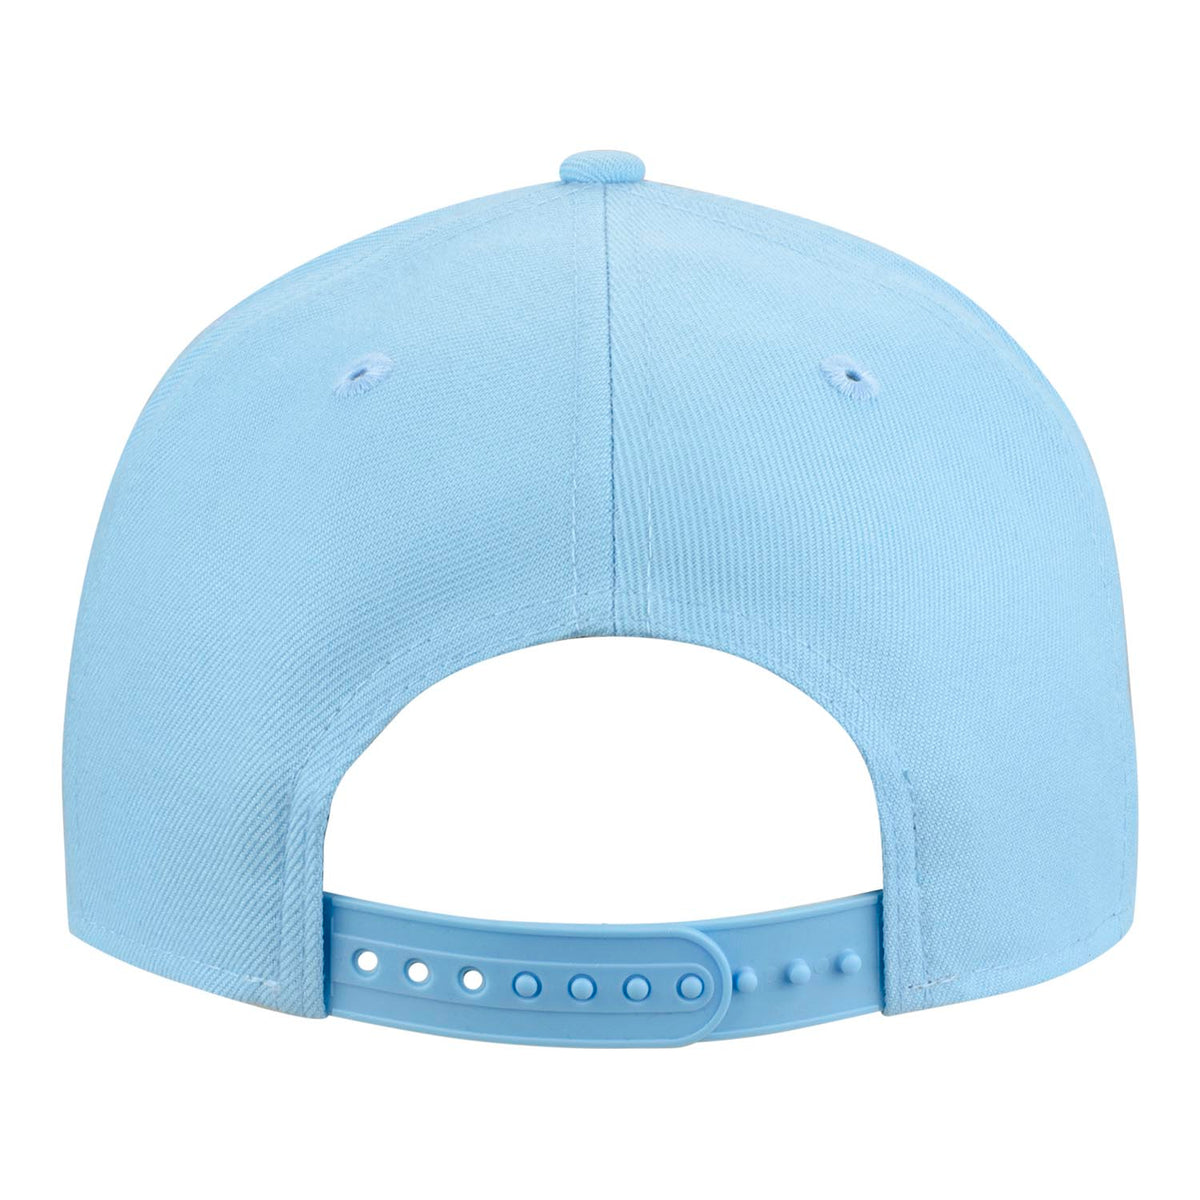 New Era 2023 PGA Championship 9Fifty in Doscientos Blue- Side View